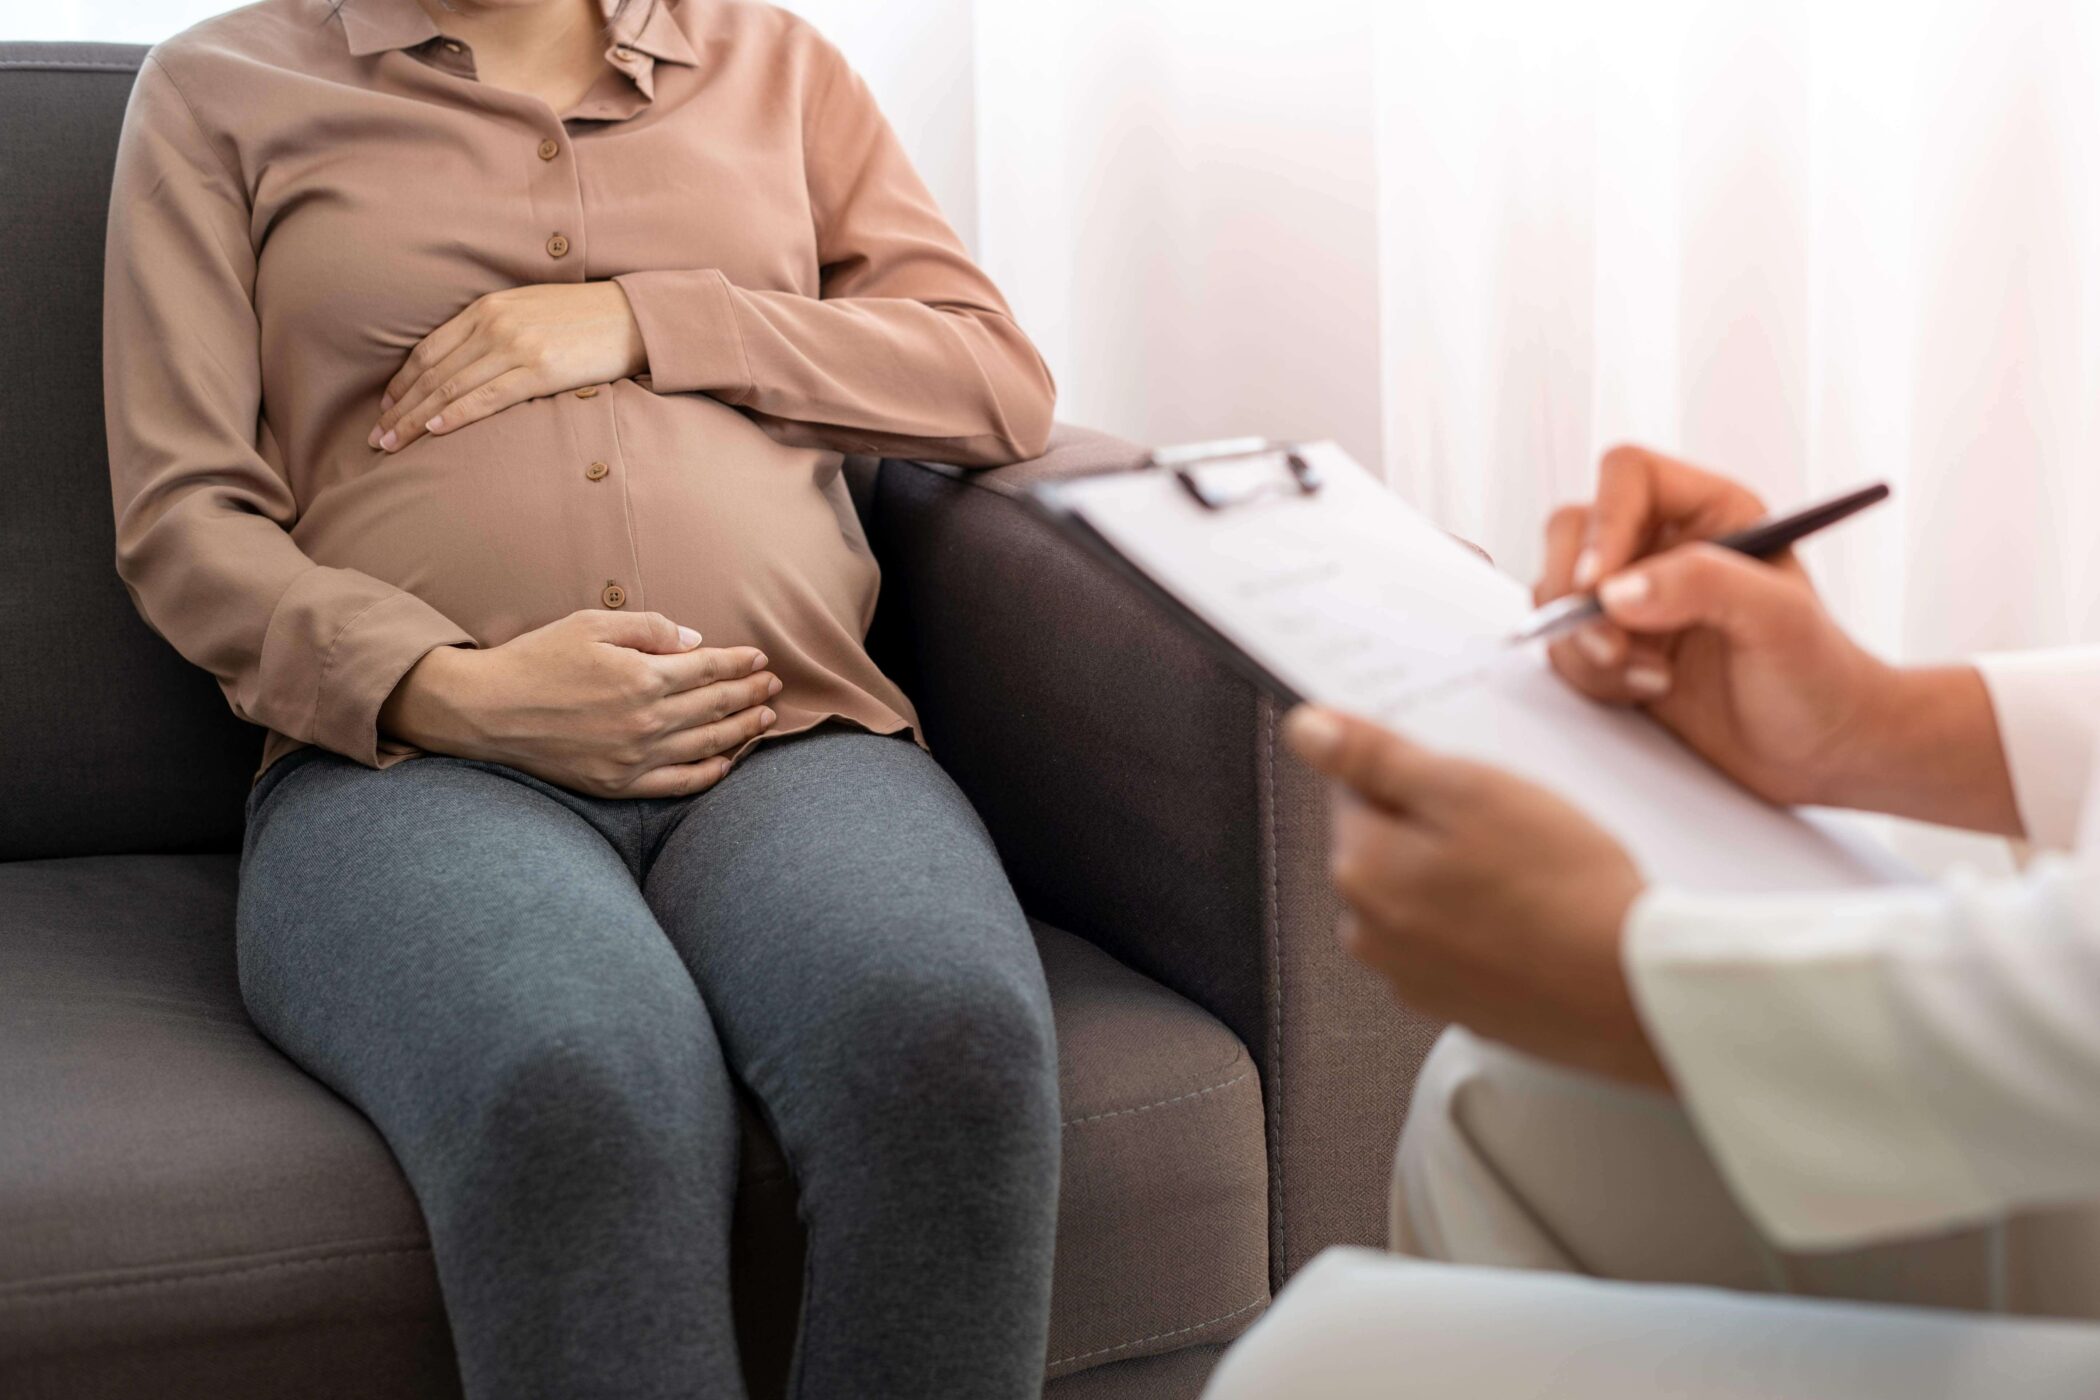 pregnant woman discussing detox with doctor